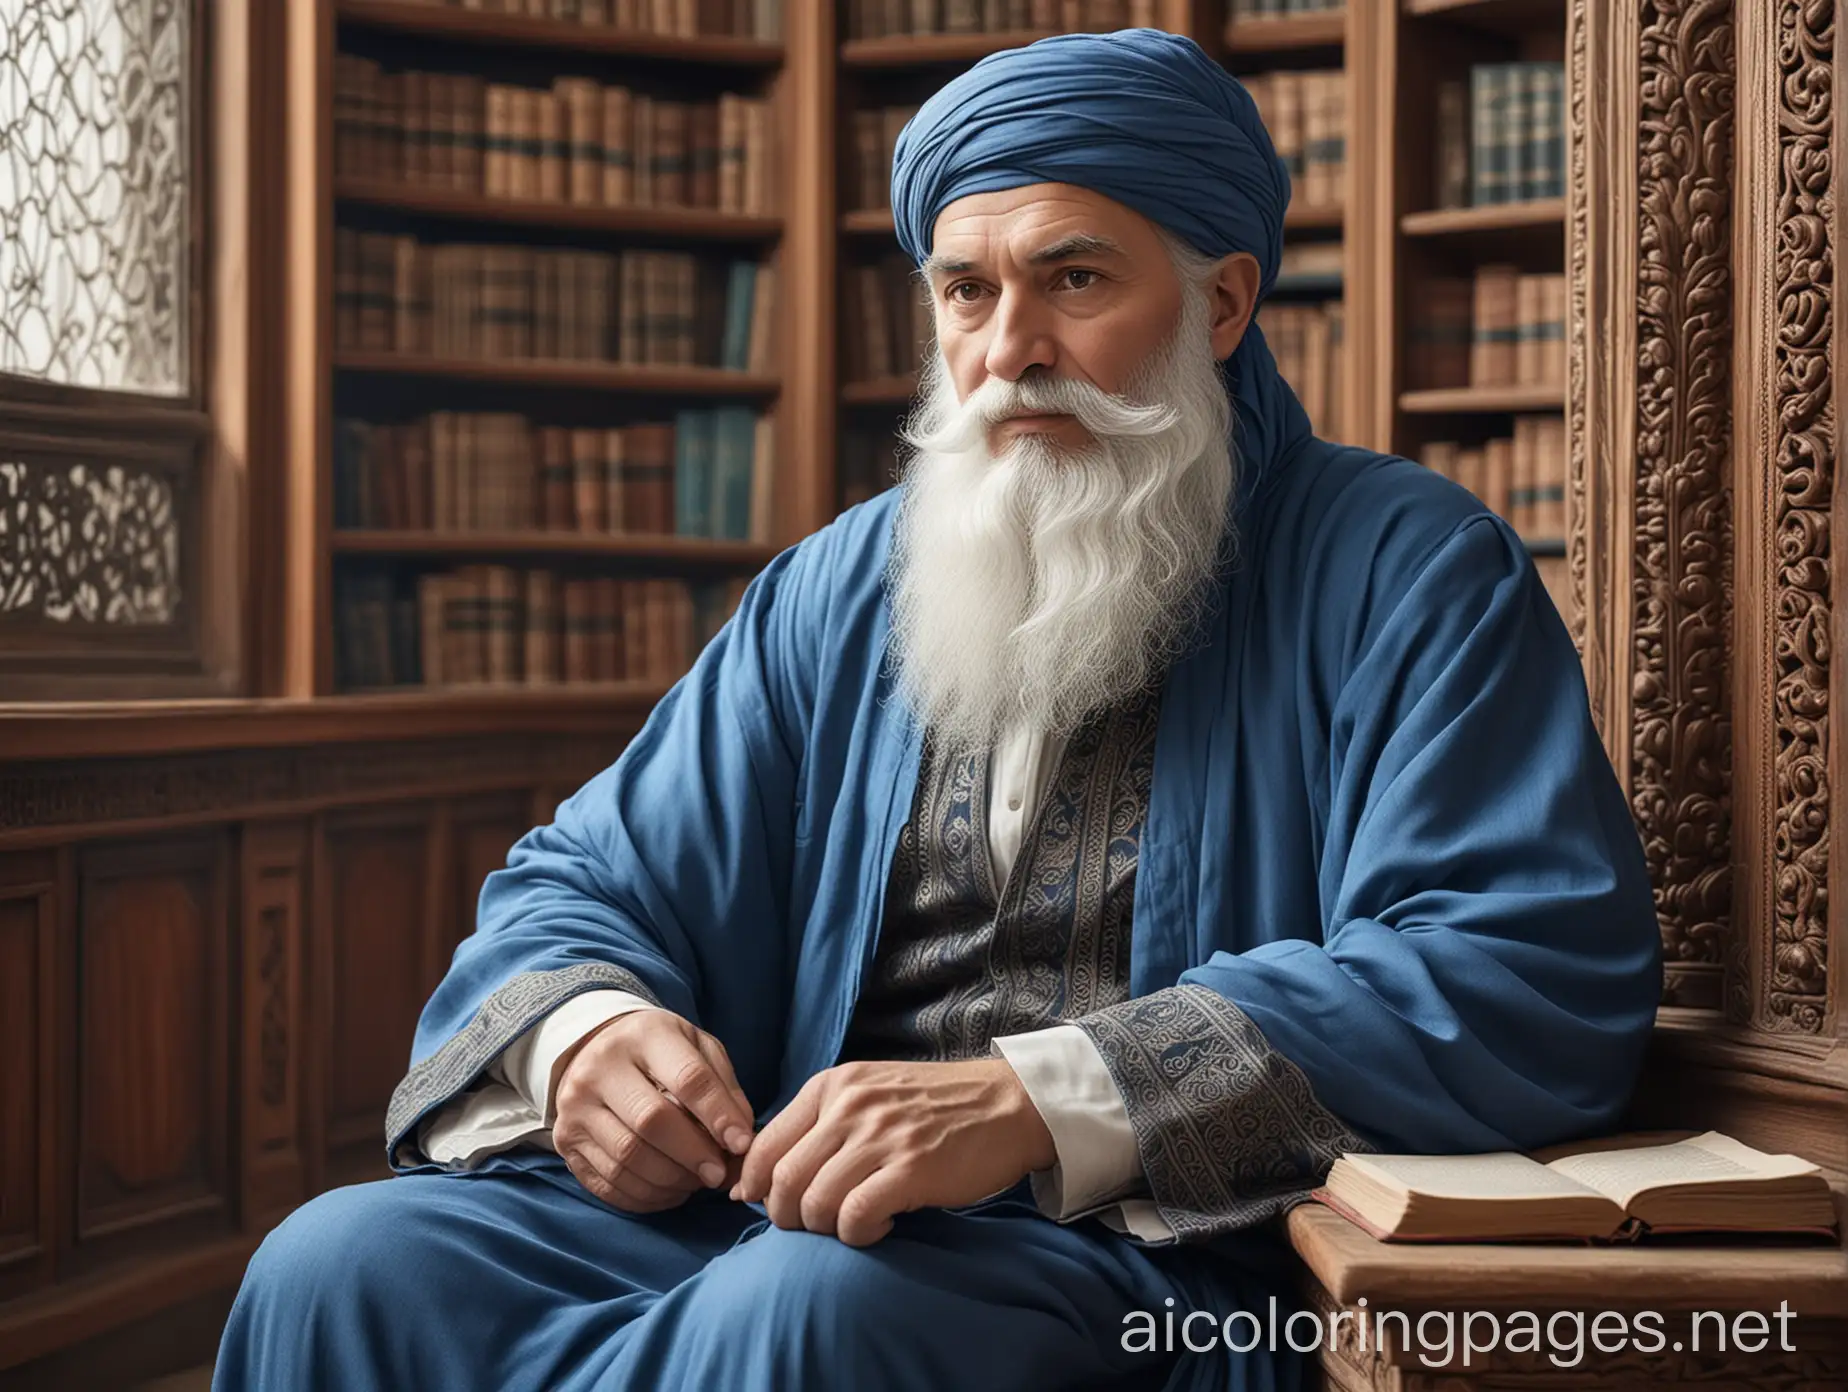 MiddleAged-Islamic-Scholar-in-Vintage-Library-Setting